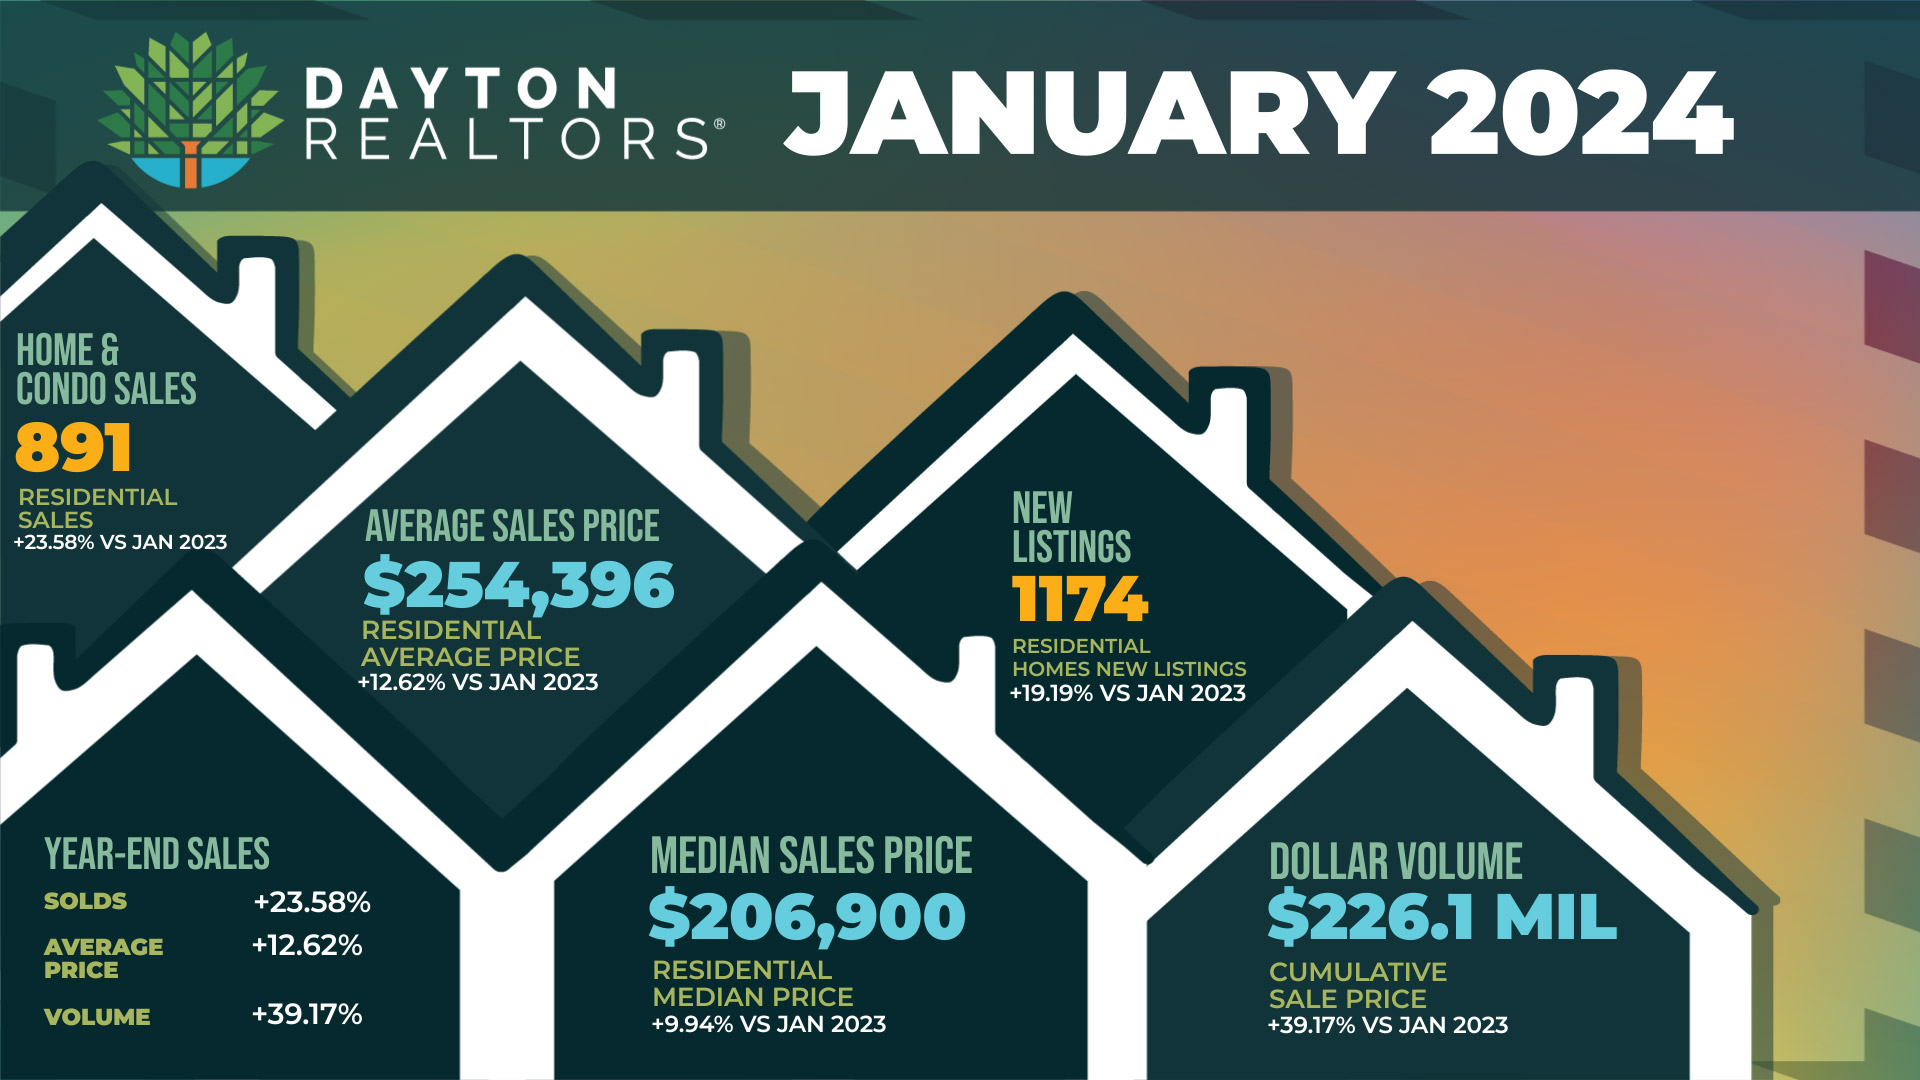 Dayton Area Home Sales for January 2024